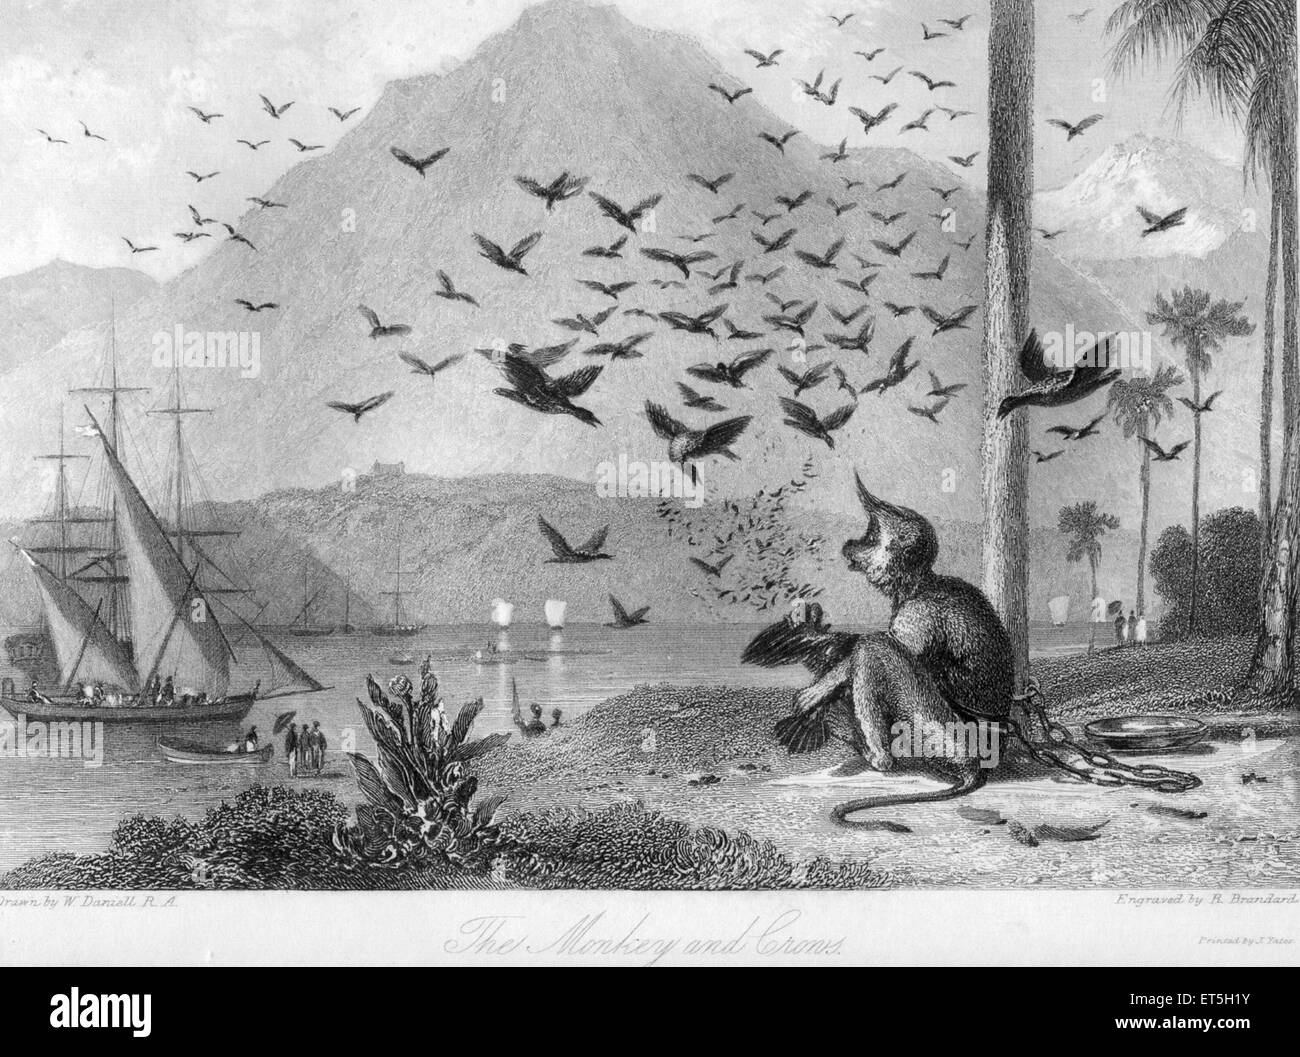 Monkey chained to tree, flying birds, India, Asia, Asian, Indian, old vintage 1800s steel engraving Stock Photo